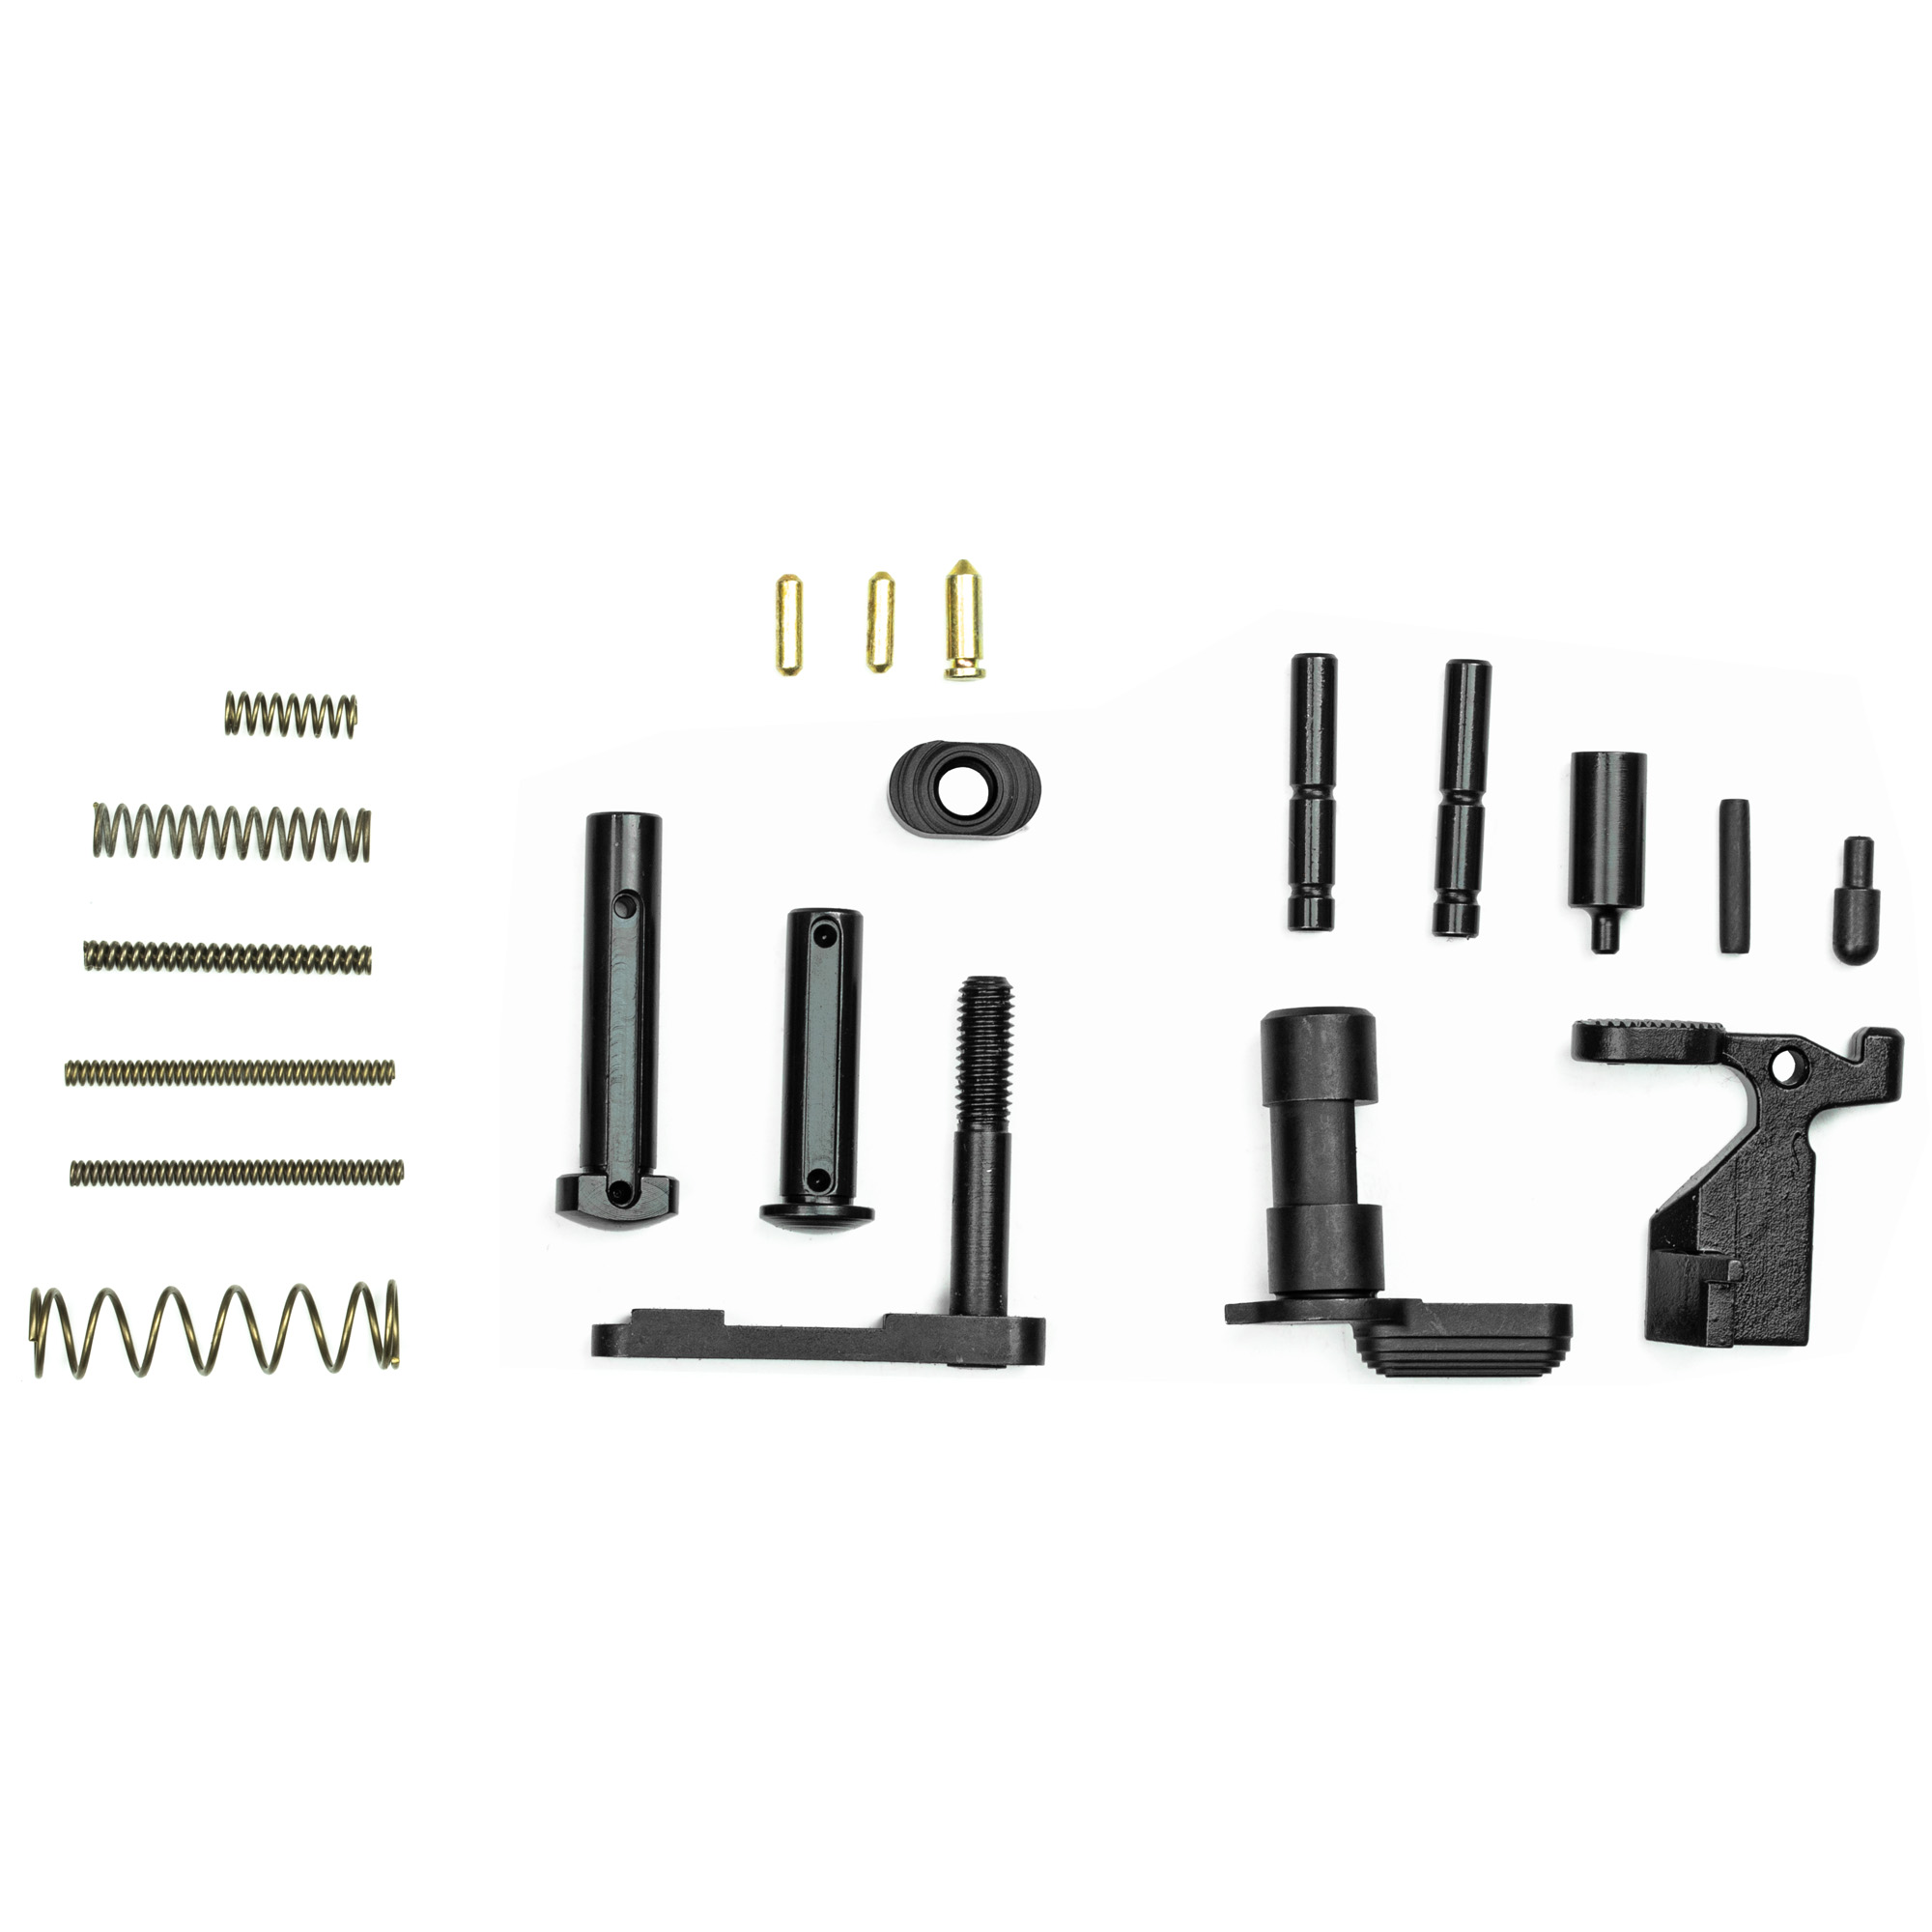 CMMG Lower Receiver Parts Kit for AR-15 - No Grip / Fire Control Group